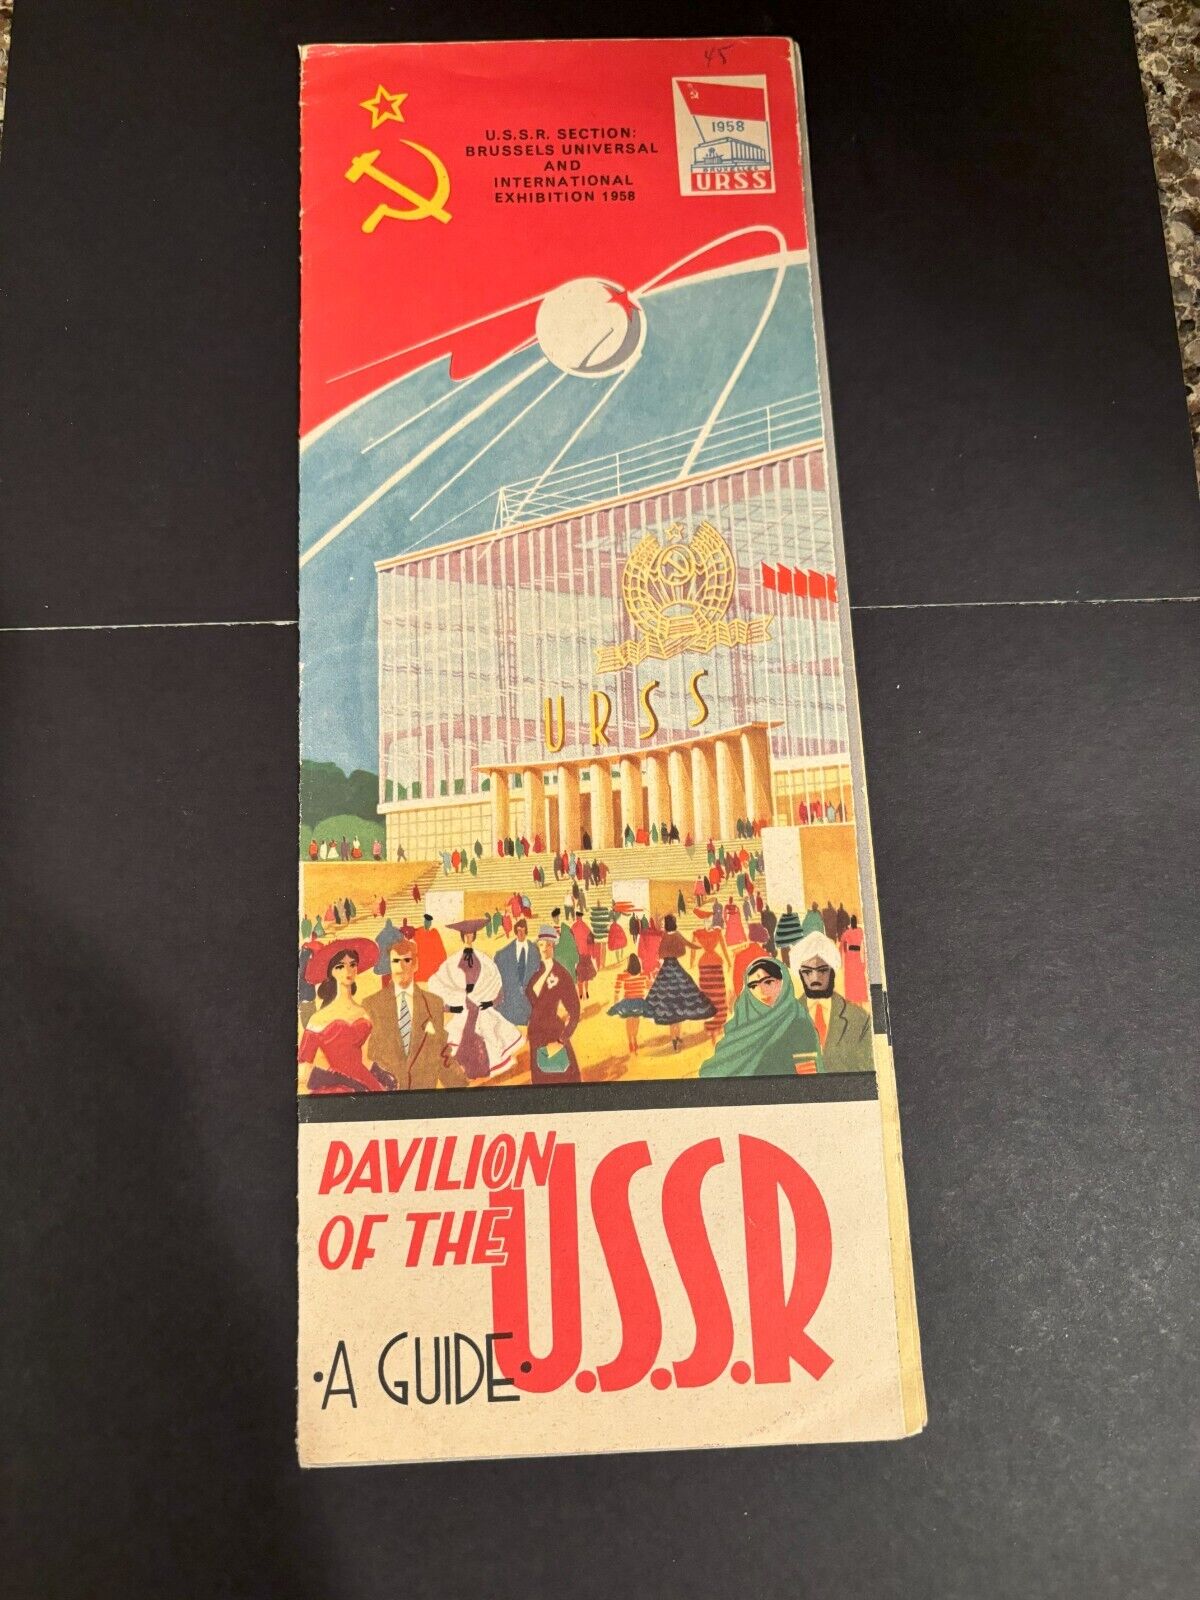 Pavilion of the USSR A Guide Brussels Universal International Exhibition 1958